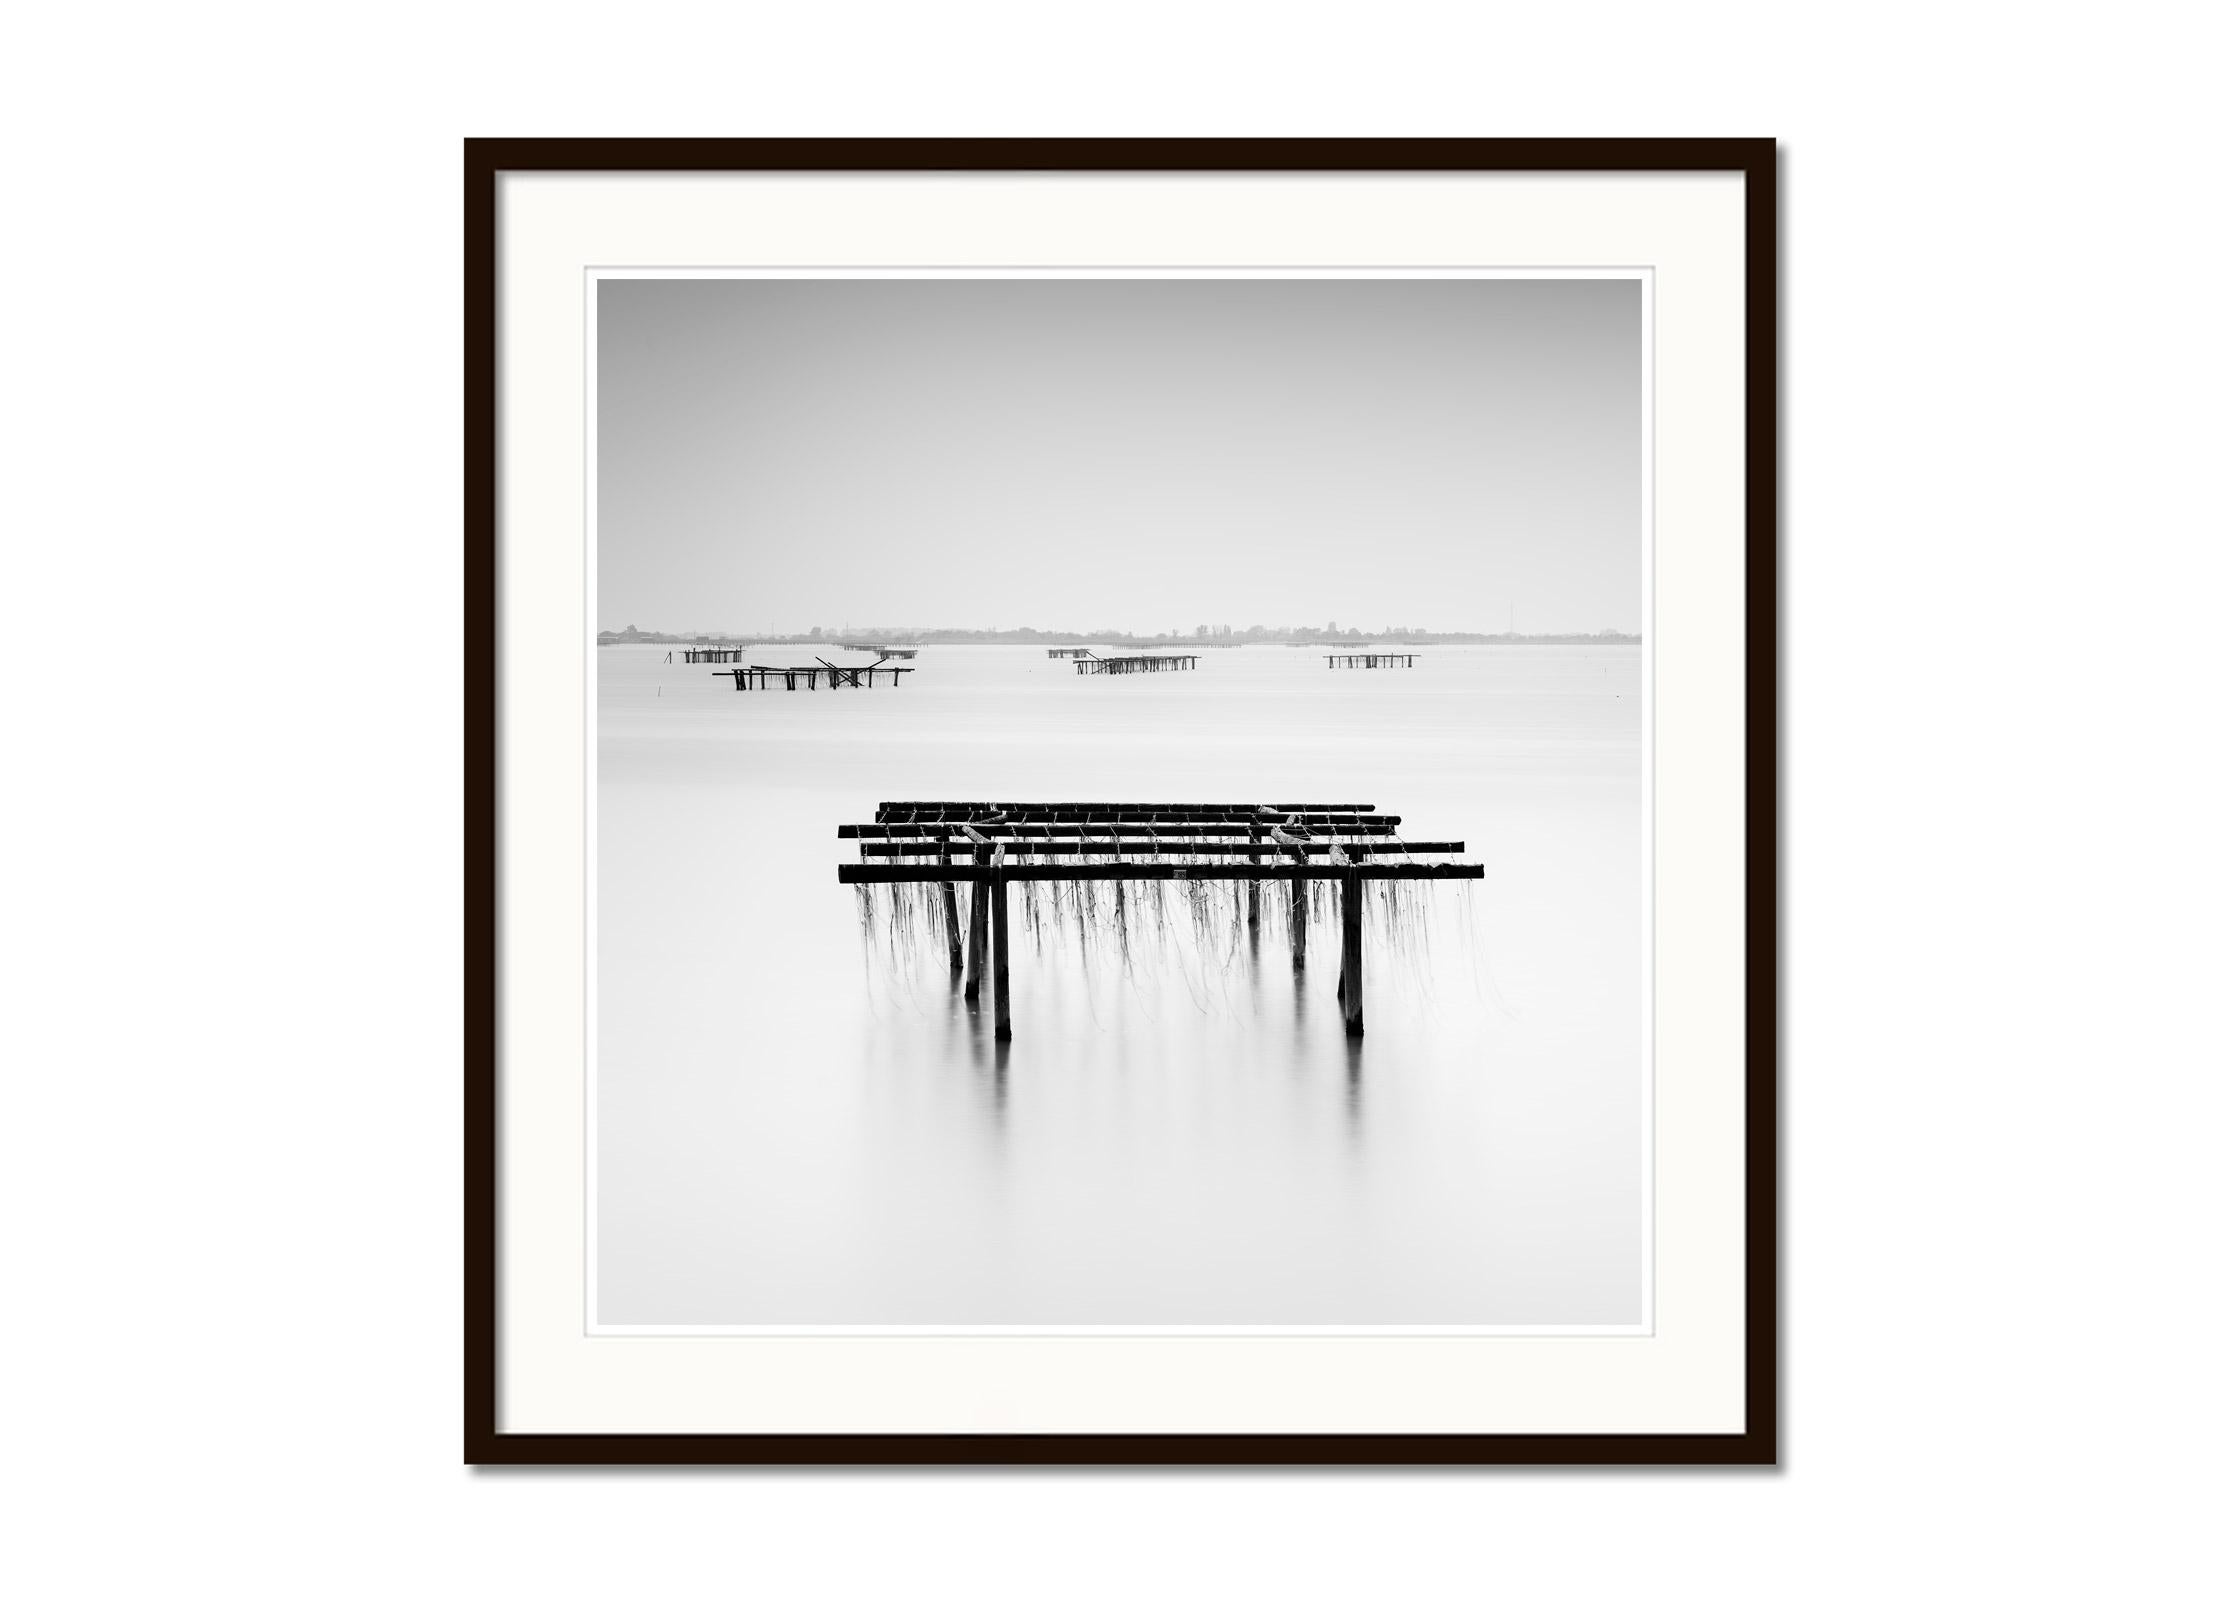 Black and white fine art long exposure waterscape - landscape photography print. Archival pigment ink print, edition of 7. Signed, titled, dated and numbered by artist. Certificate of authenticity included. Printed with 4cm white